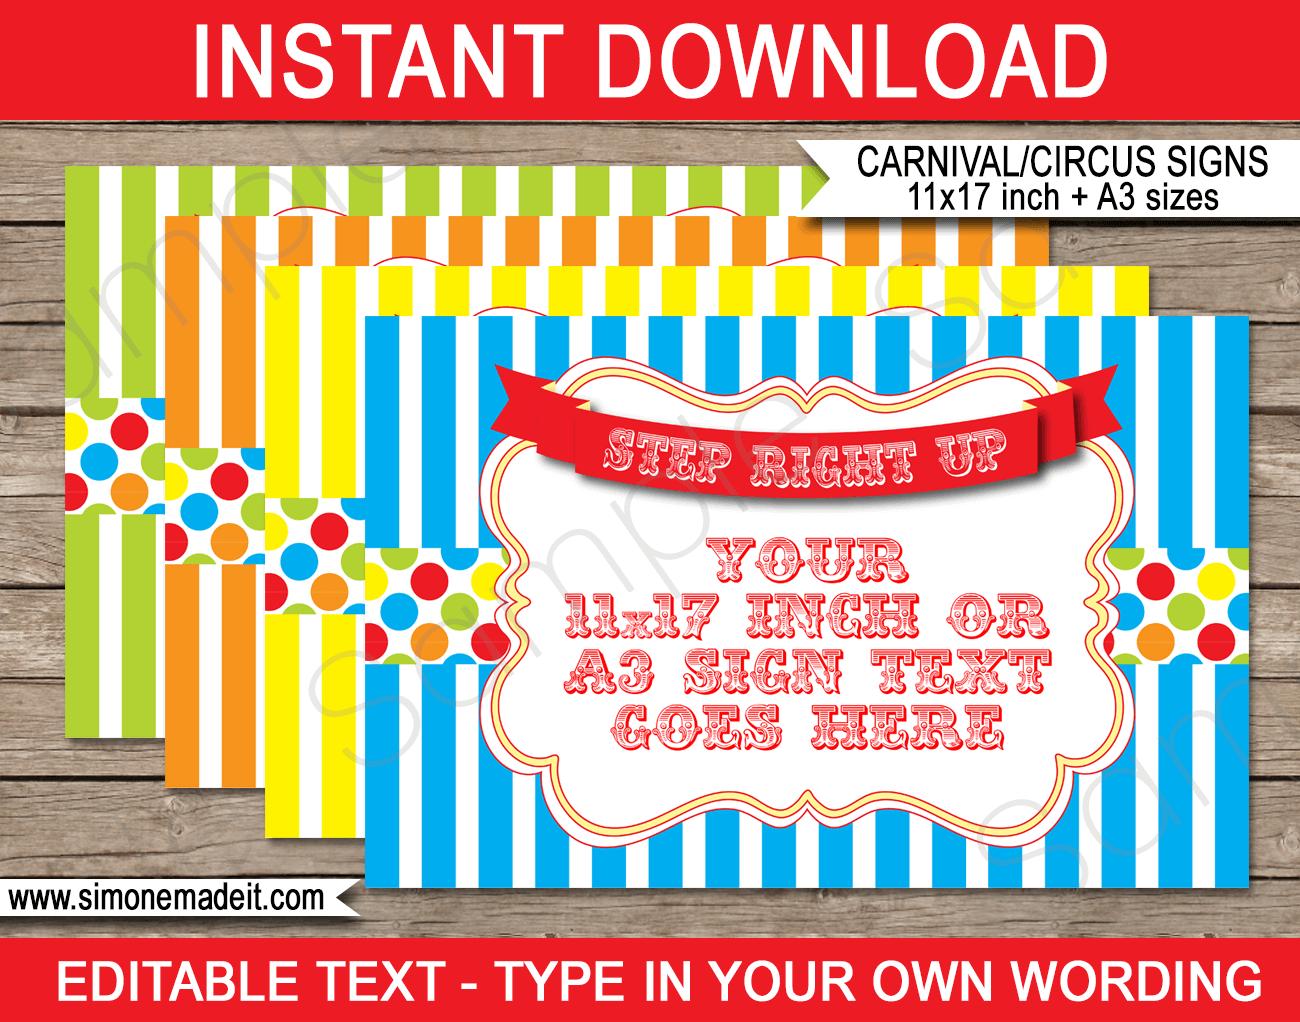 Printable Carnival Game Signs | Editable Text | Editable DIY Template | Circus Theme Party Decorations | $4.00 Instant Download via SIMONEmadeit.com